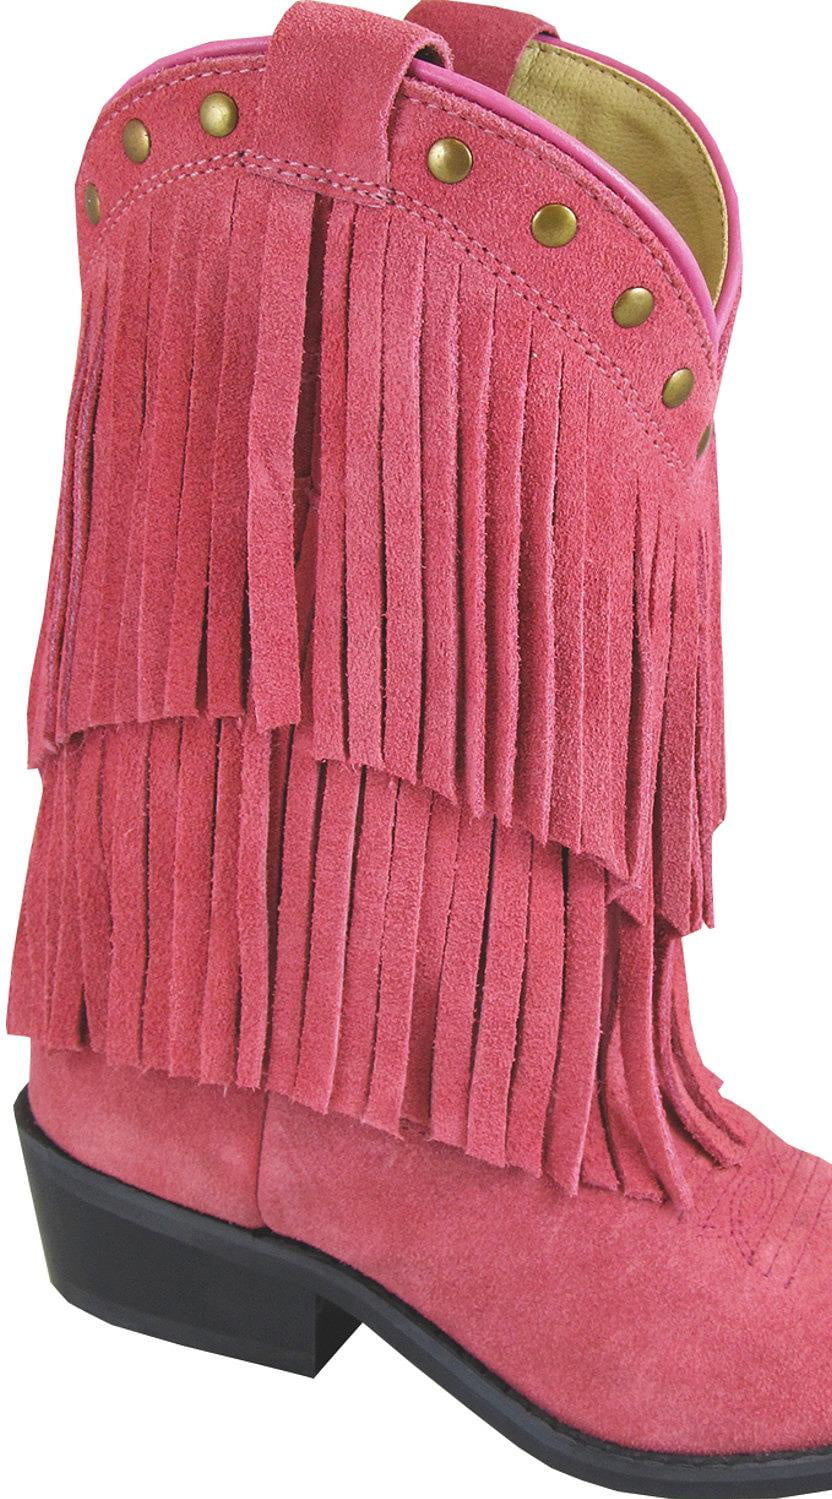 Kid's Wisteria Pink Double Fringe Leather Cowboy Boot